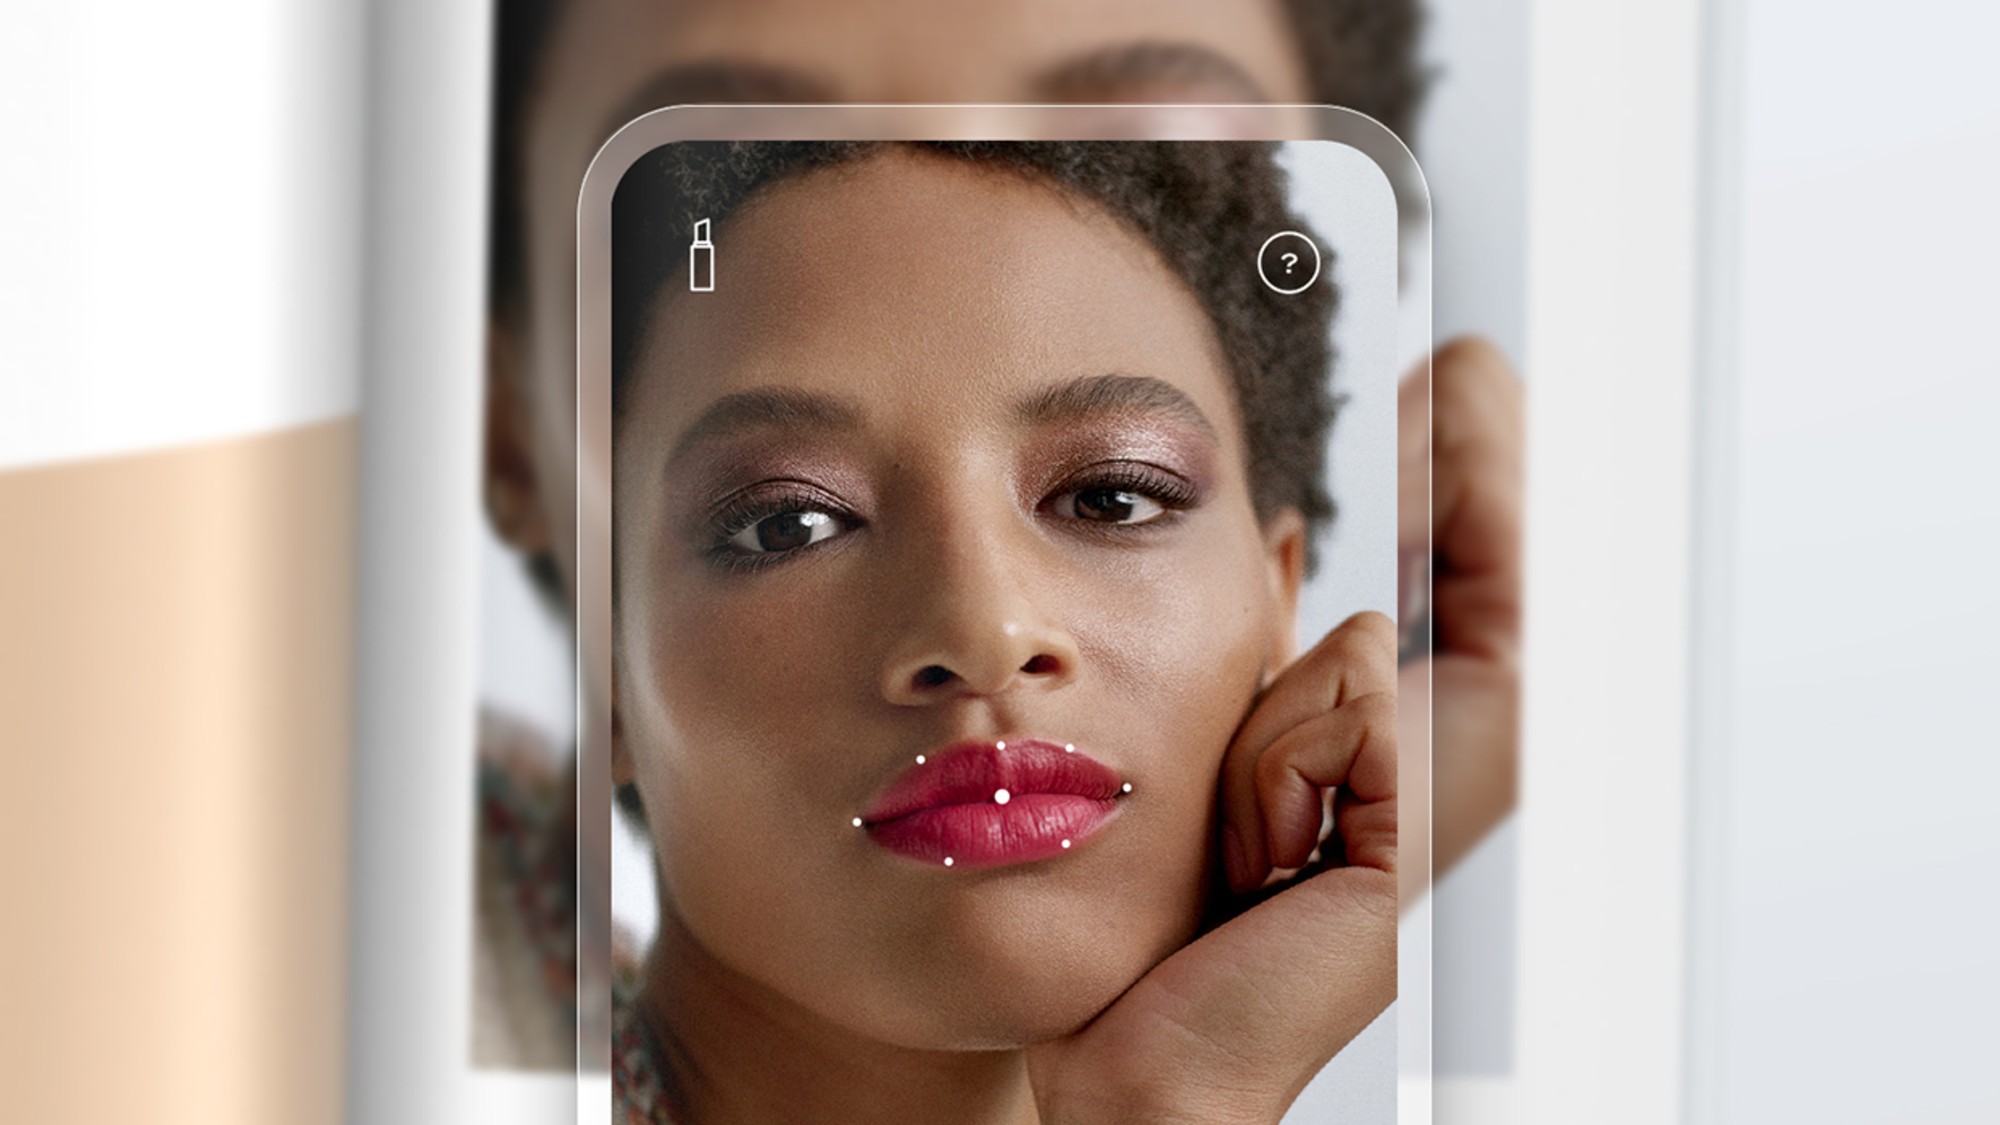 Looking for the perfect lipstick? The Chanel Lipscanner app finds